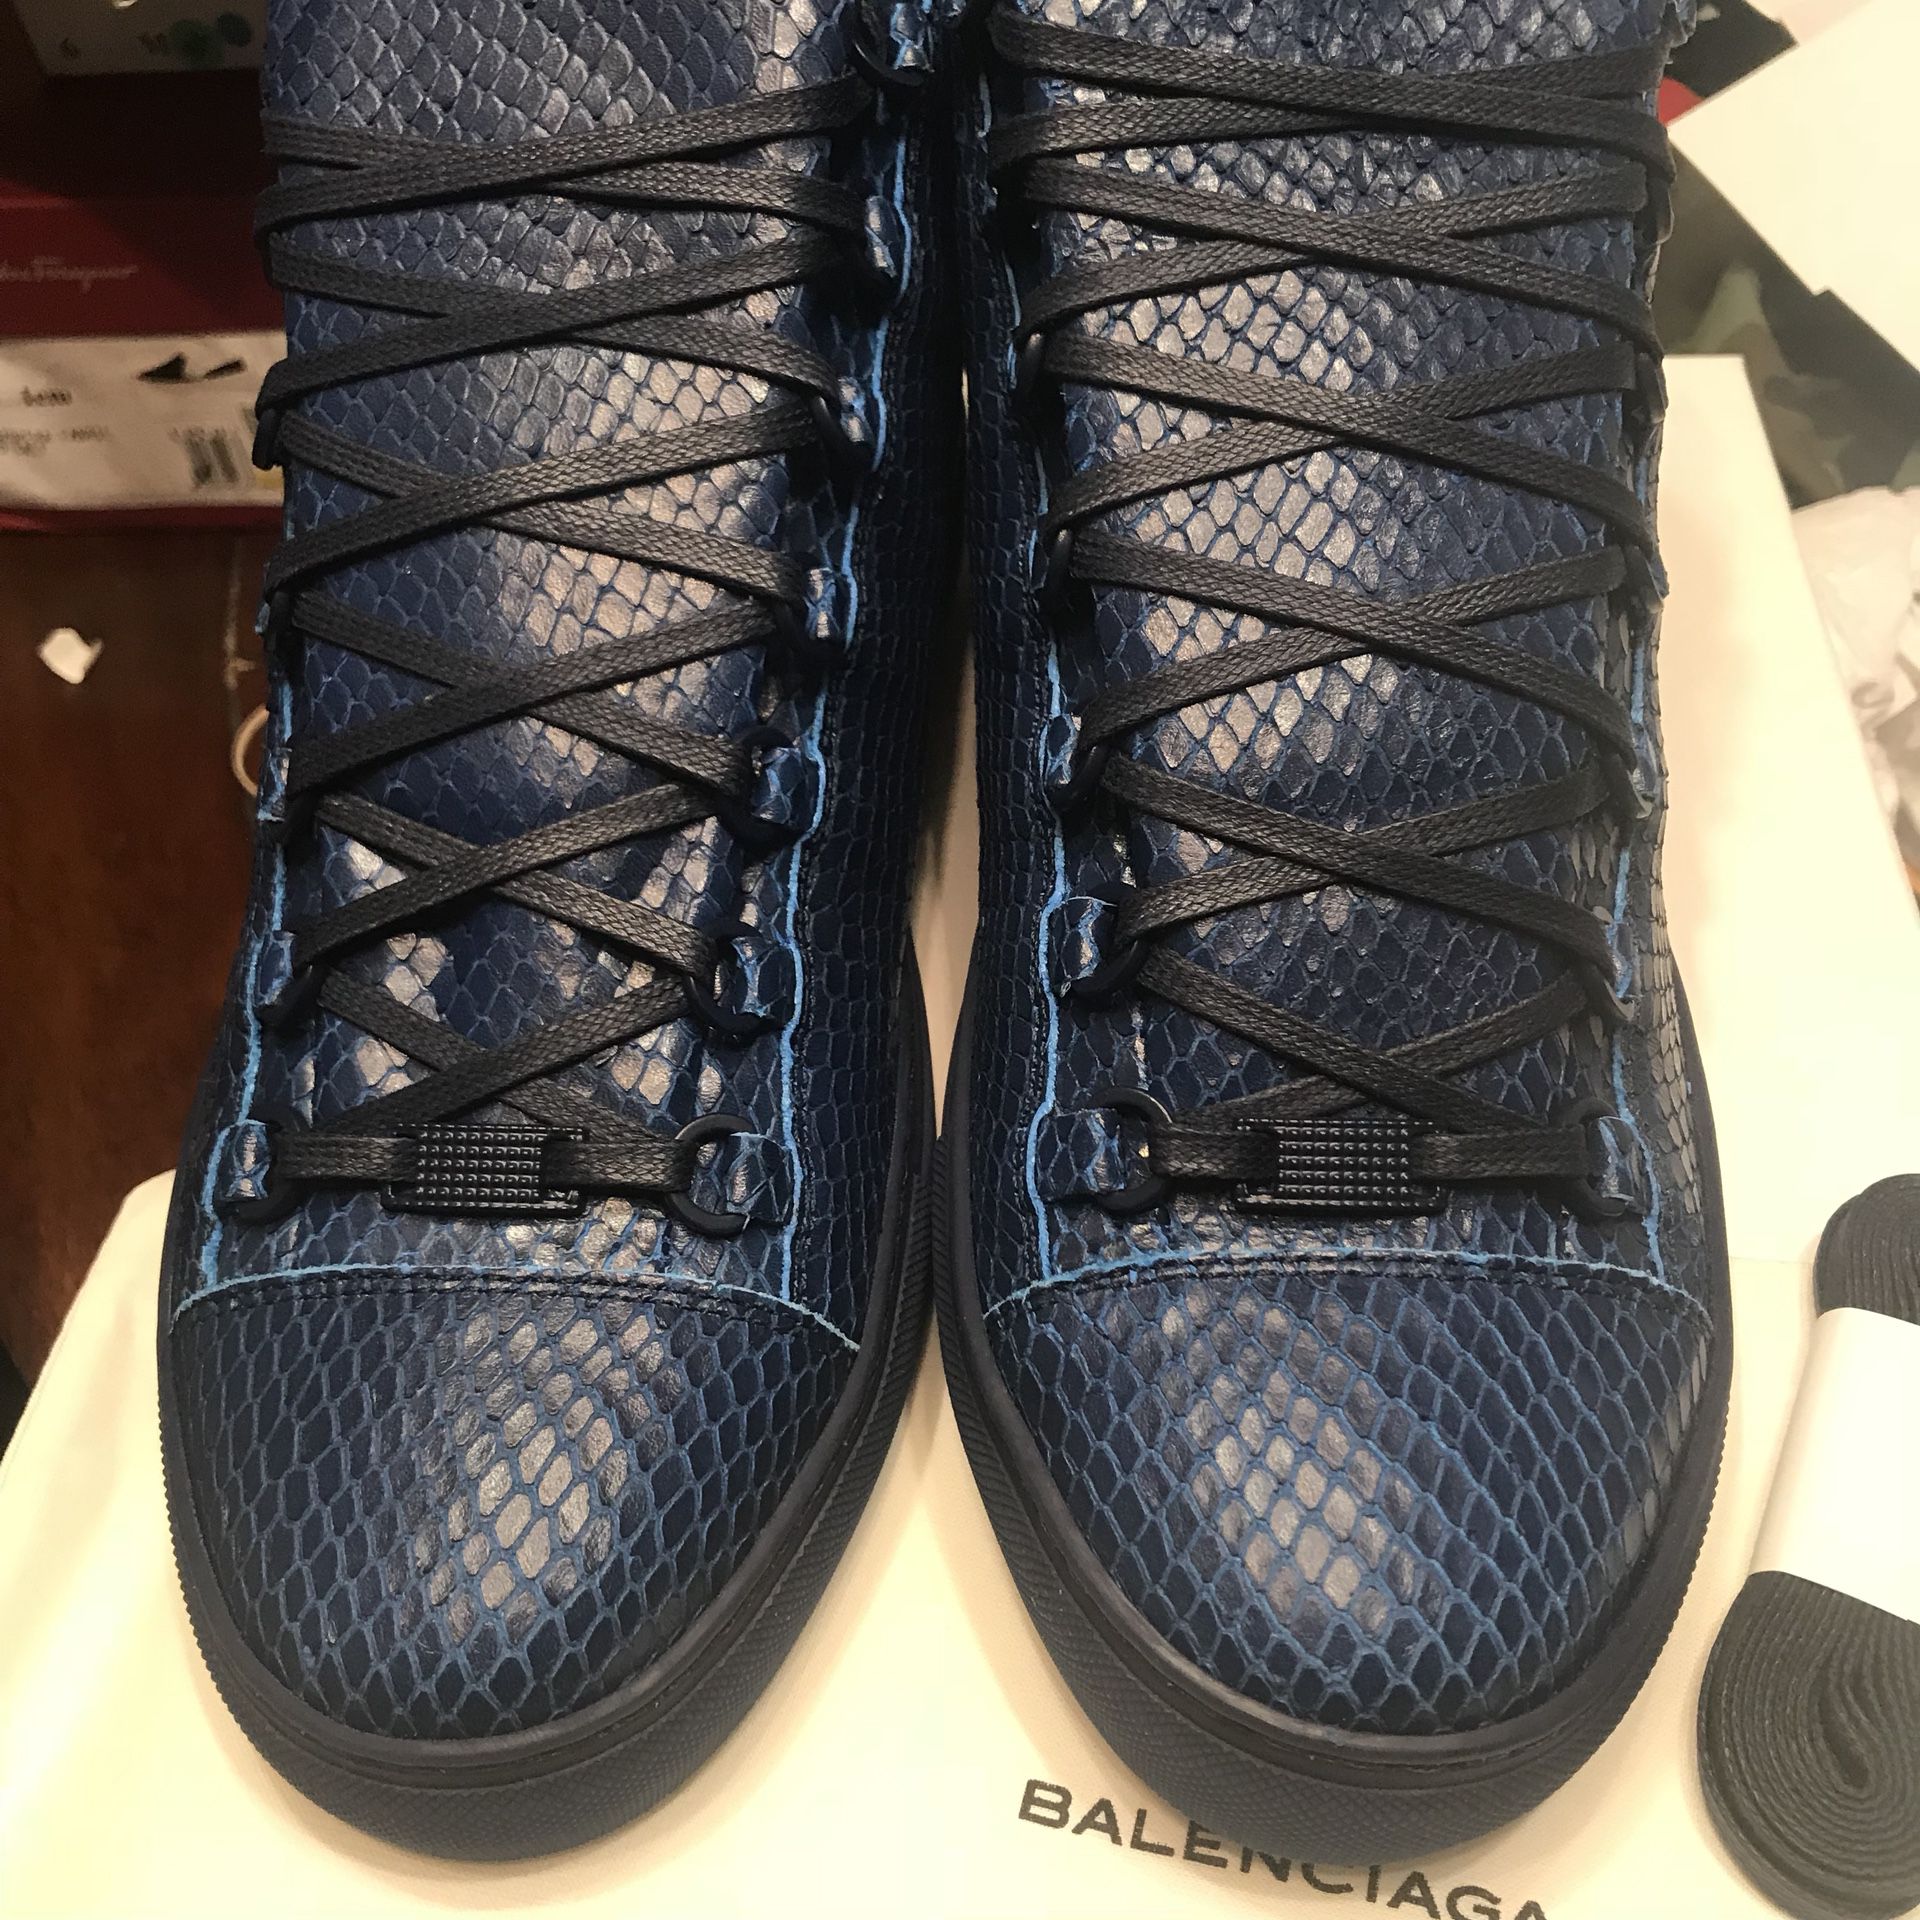 NEW Balenciaga High Top Faux Python Blue Sz 9.5 or 10 US for Sale in Boston, MA - OfferUp